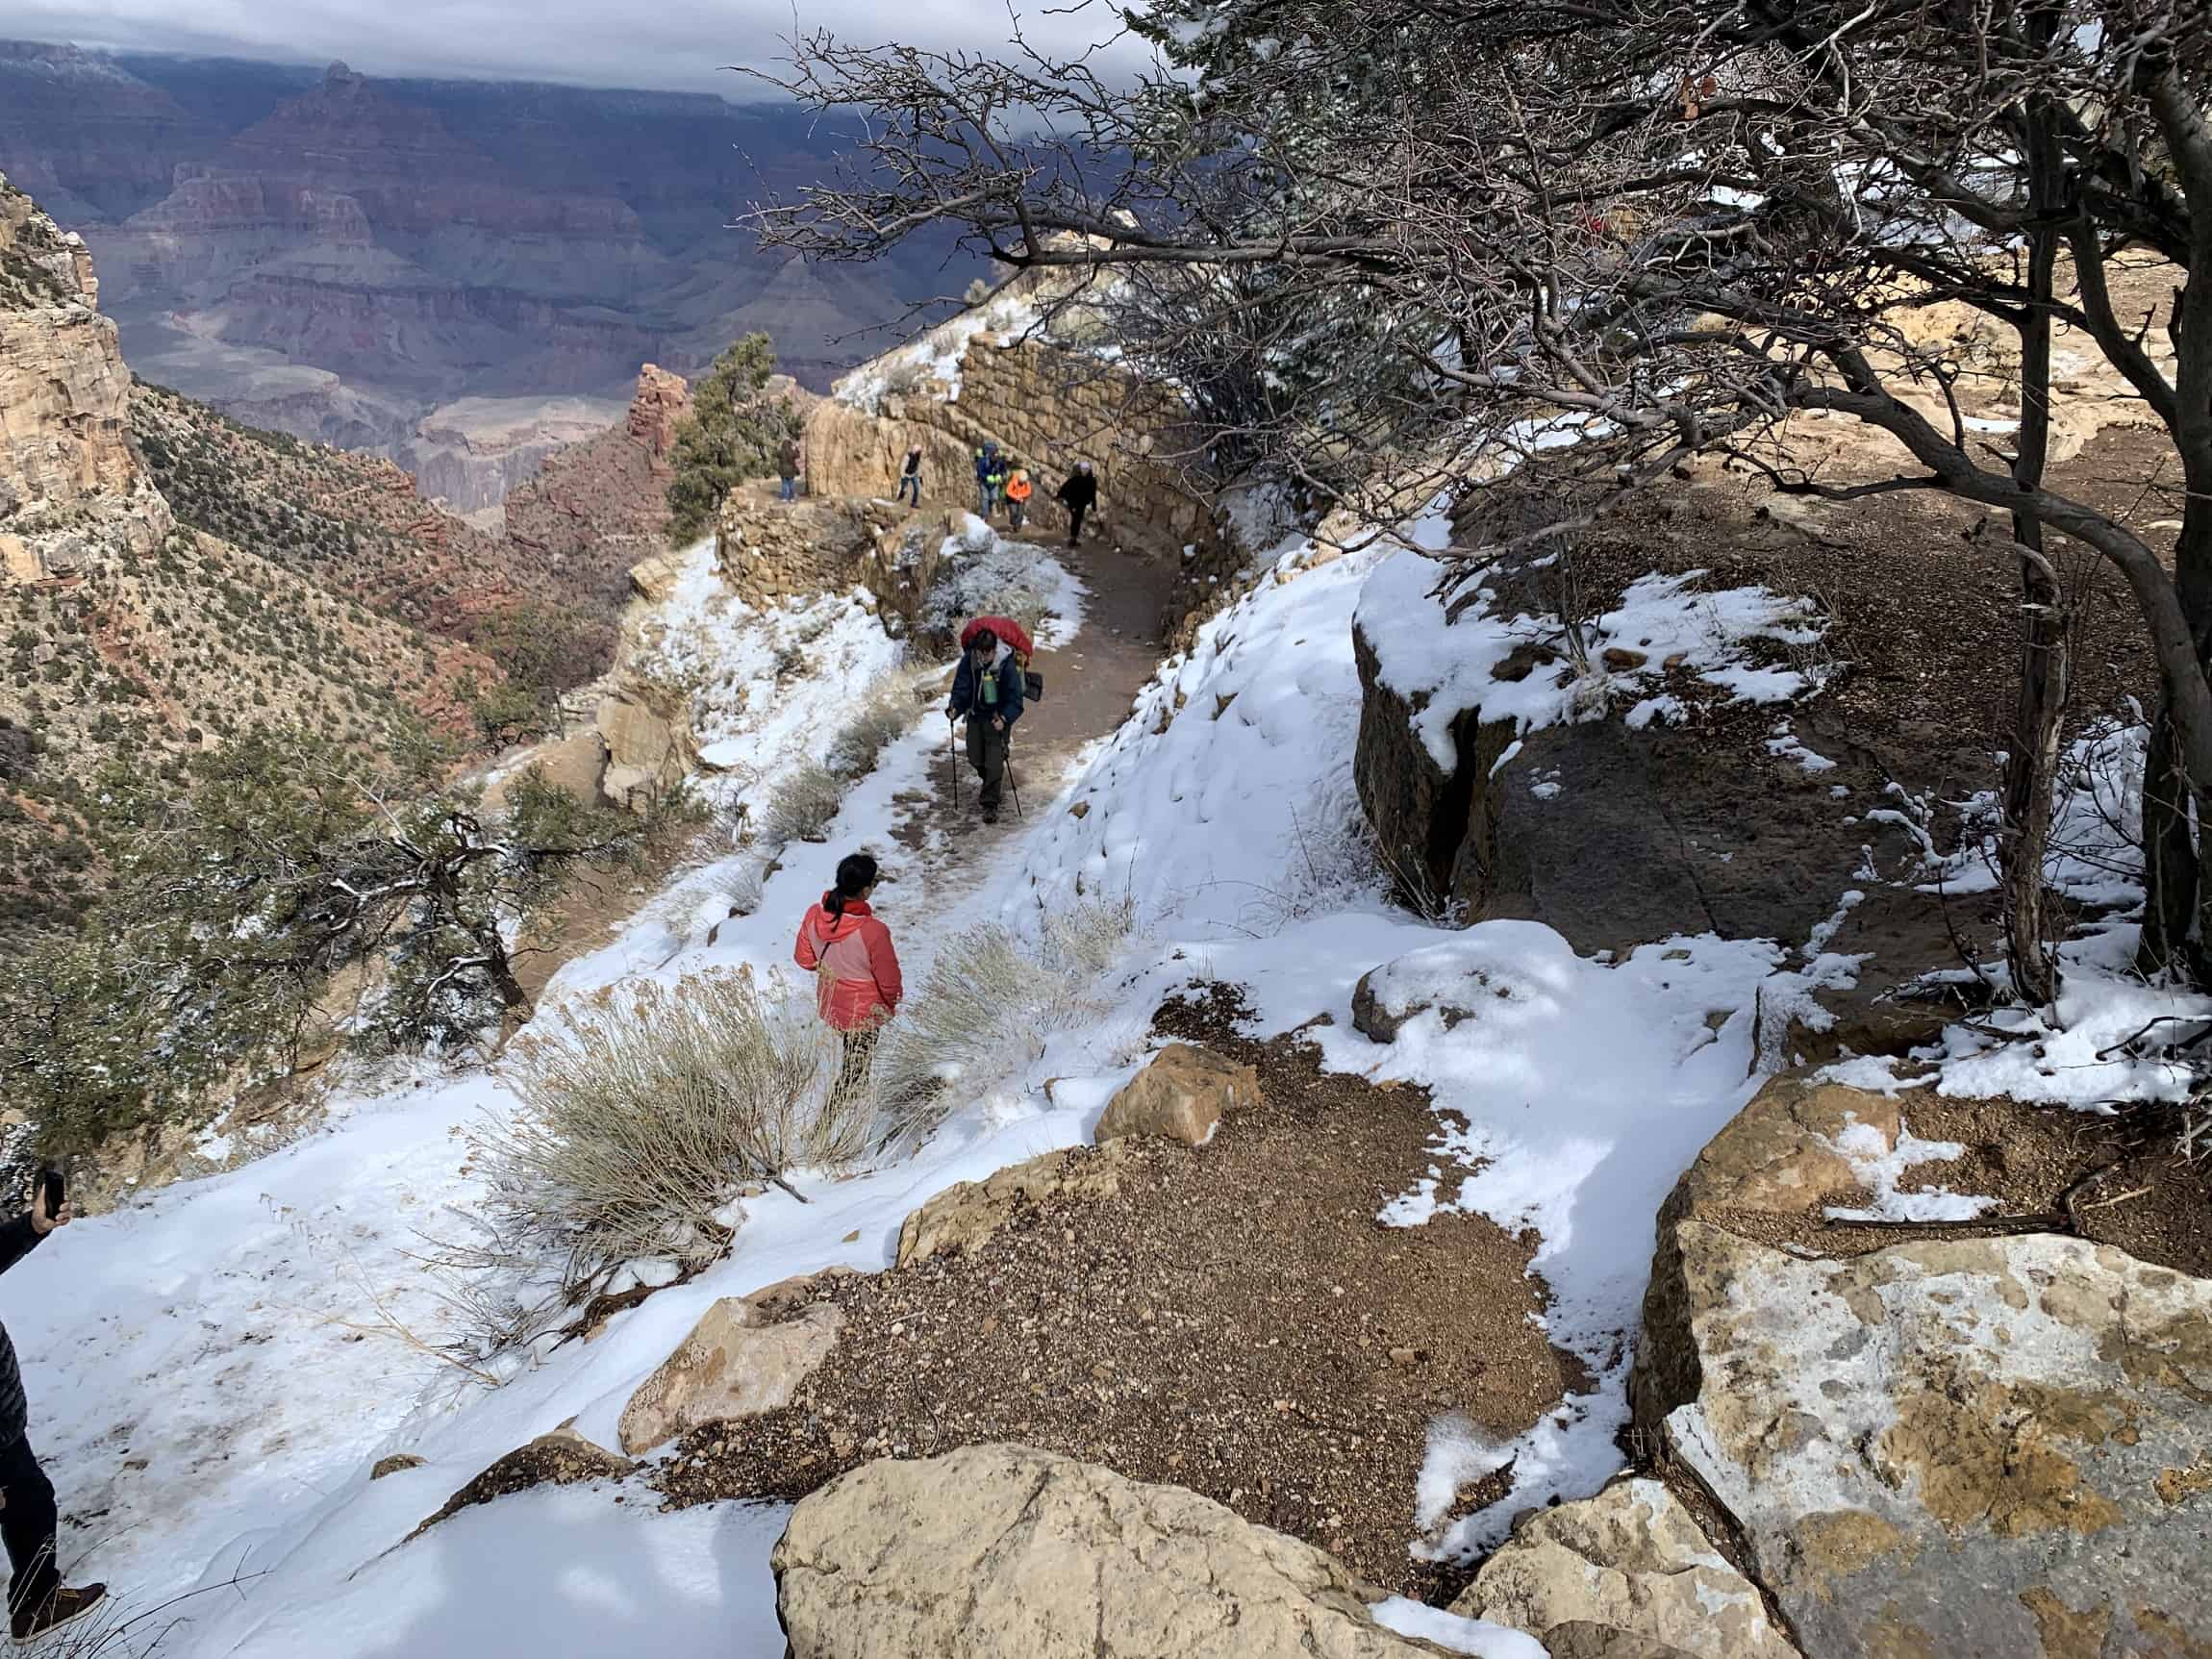 Grand Canyon in the winter